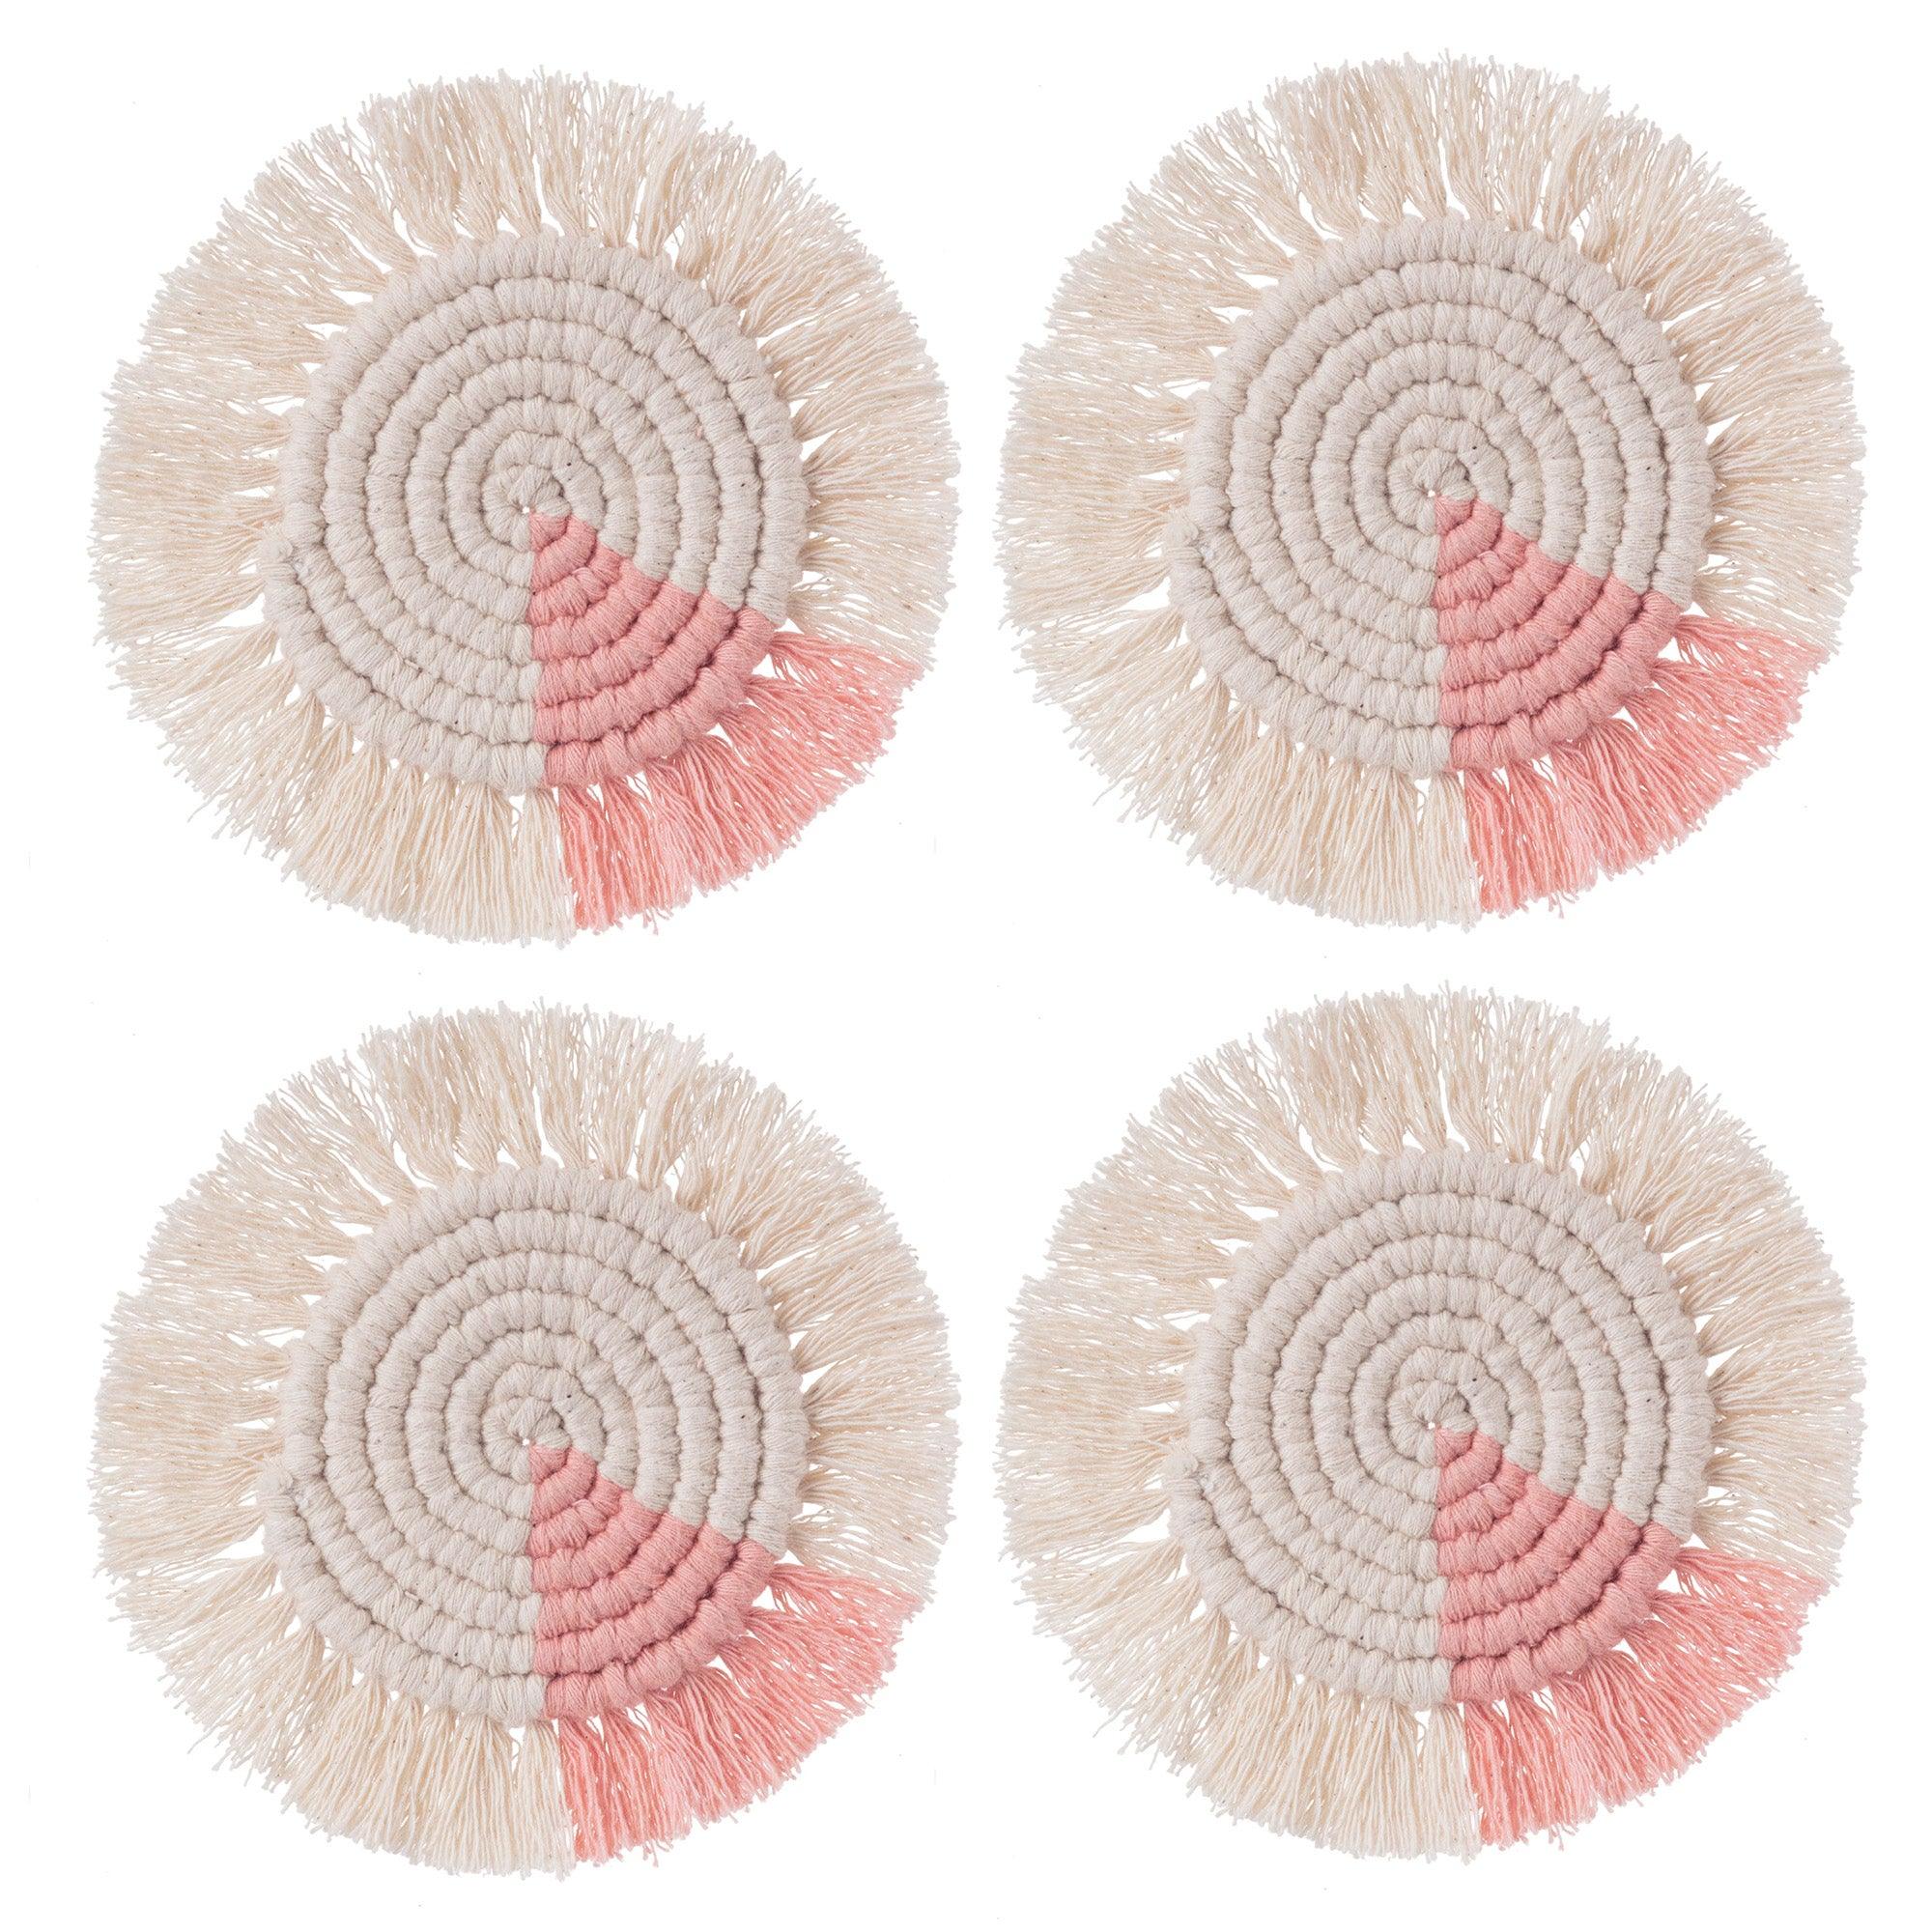 Macrame Coasters in Blush with Fringe - Set of 4 - Life In Alignment